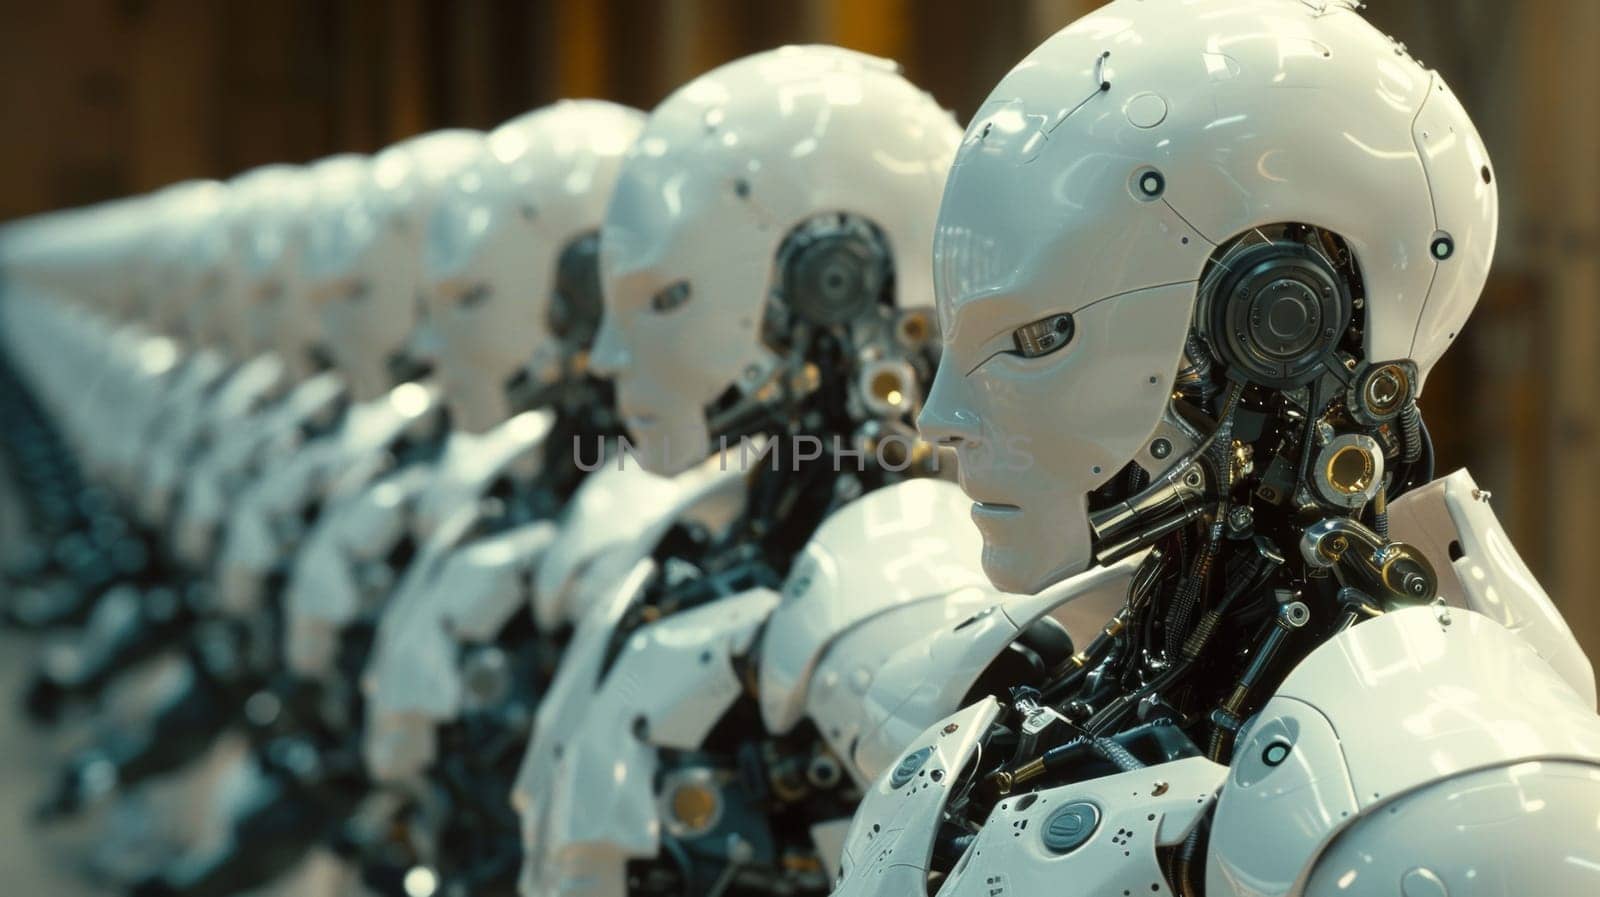 A row of white robots lined up in a line